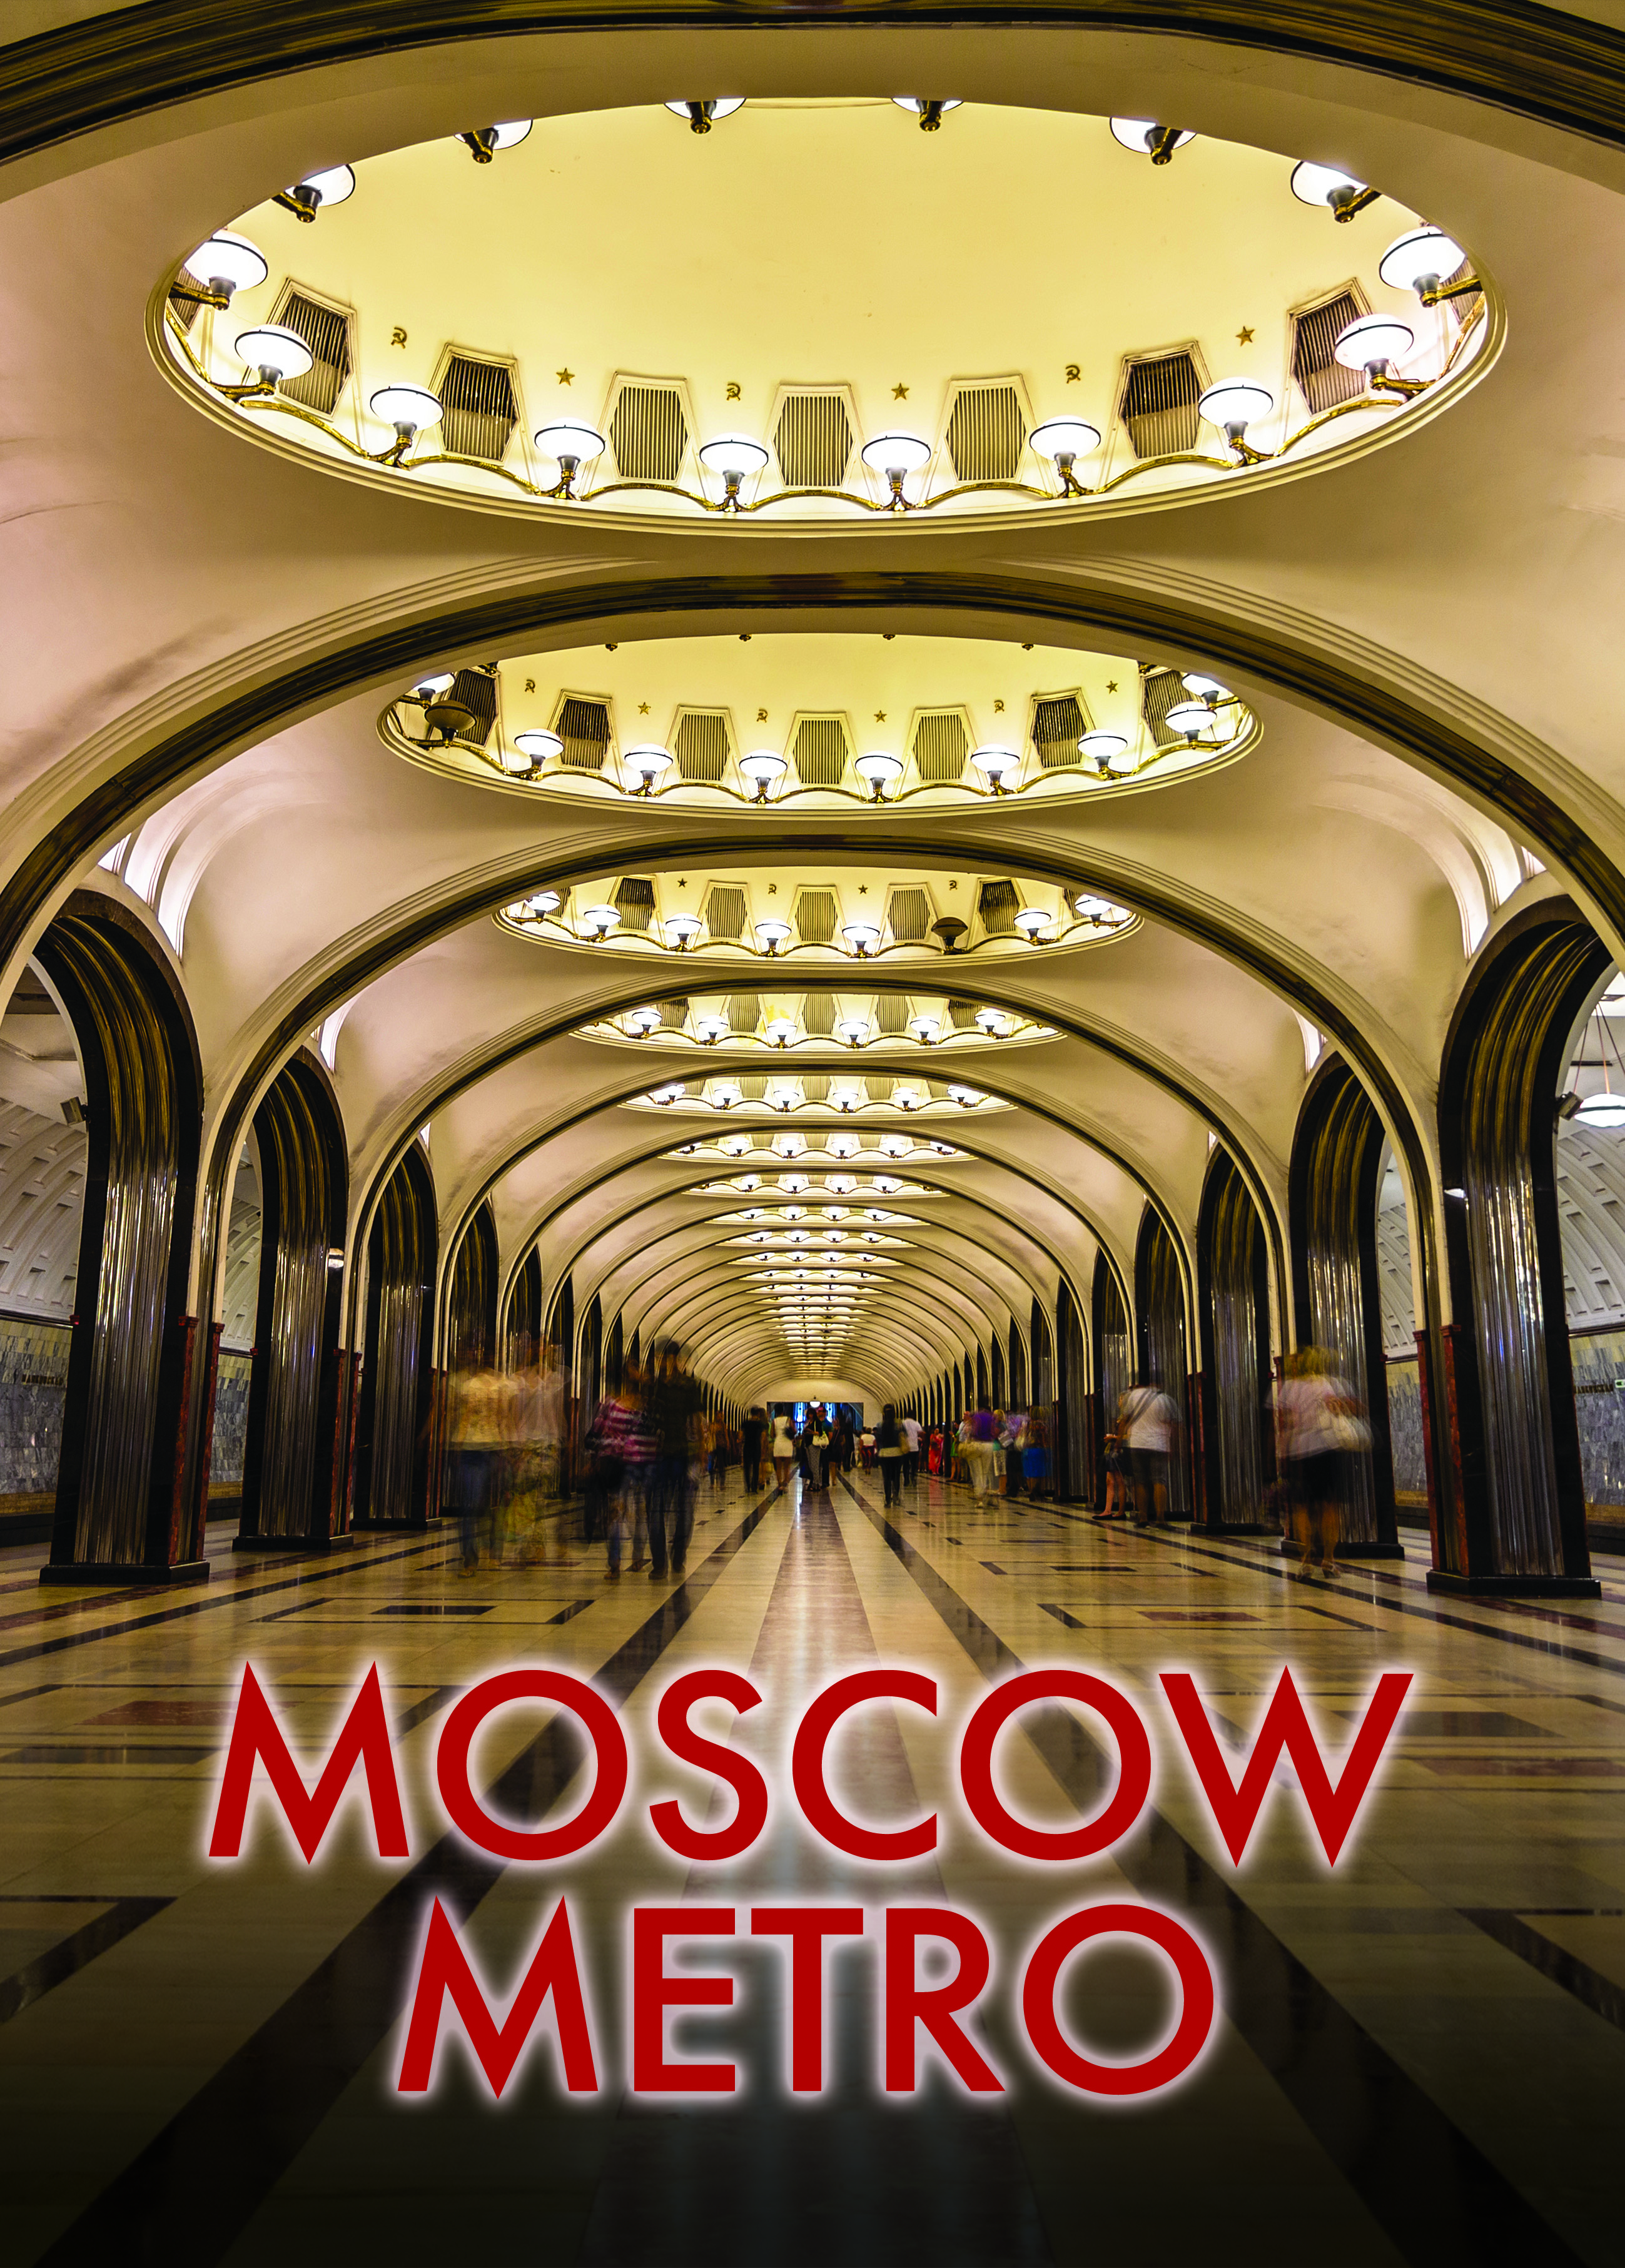 SERBIAN TV VIEWERS WILL SEE "MOSCOW METRO" AGAIN